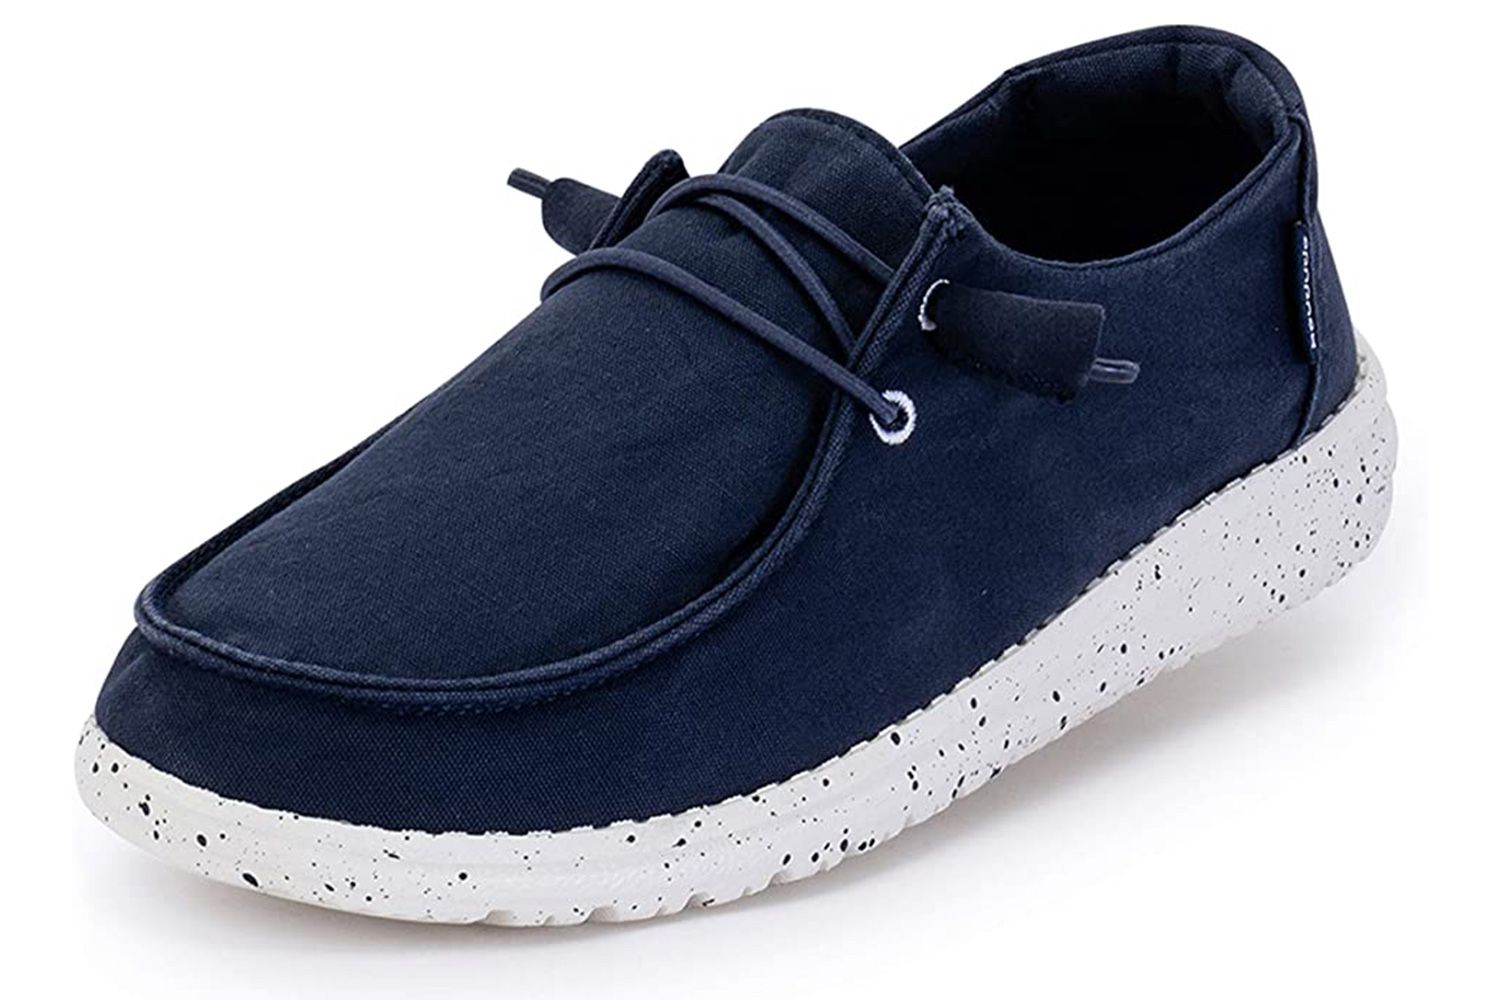 comfortable women's shoes for standing all day